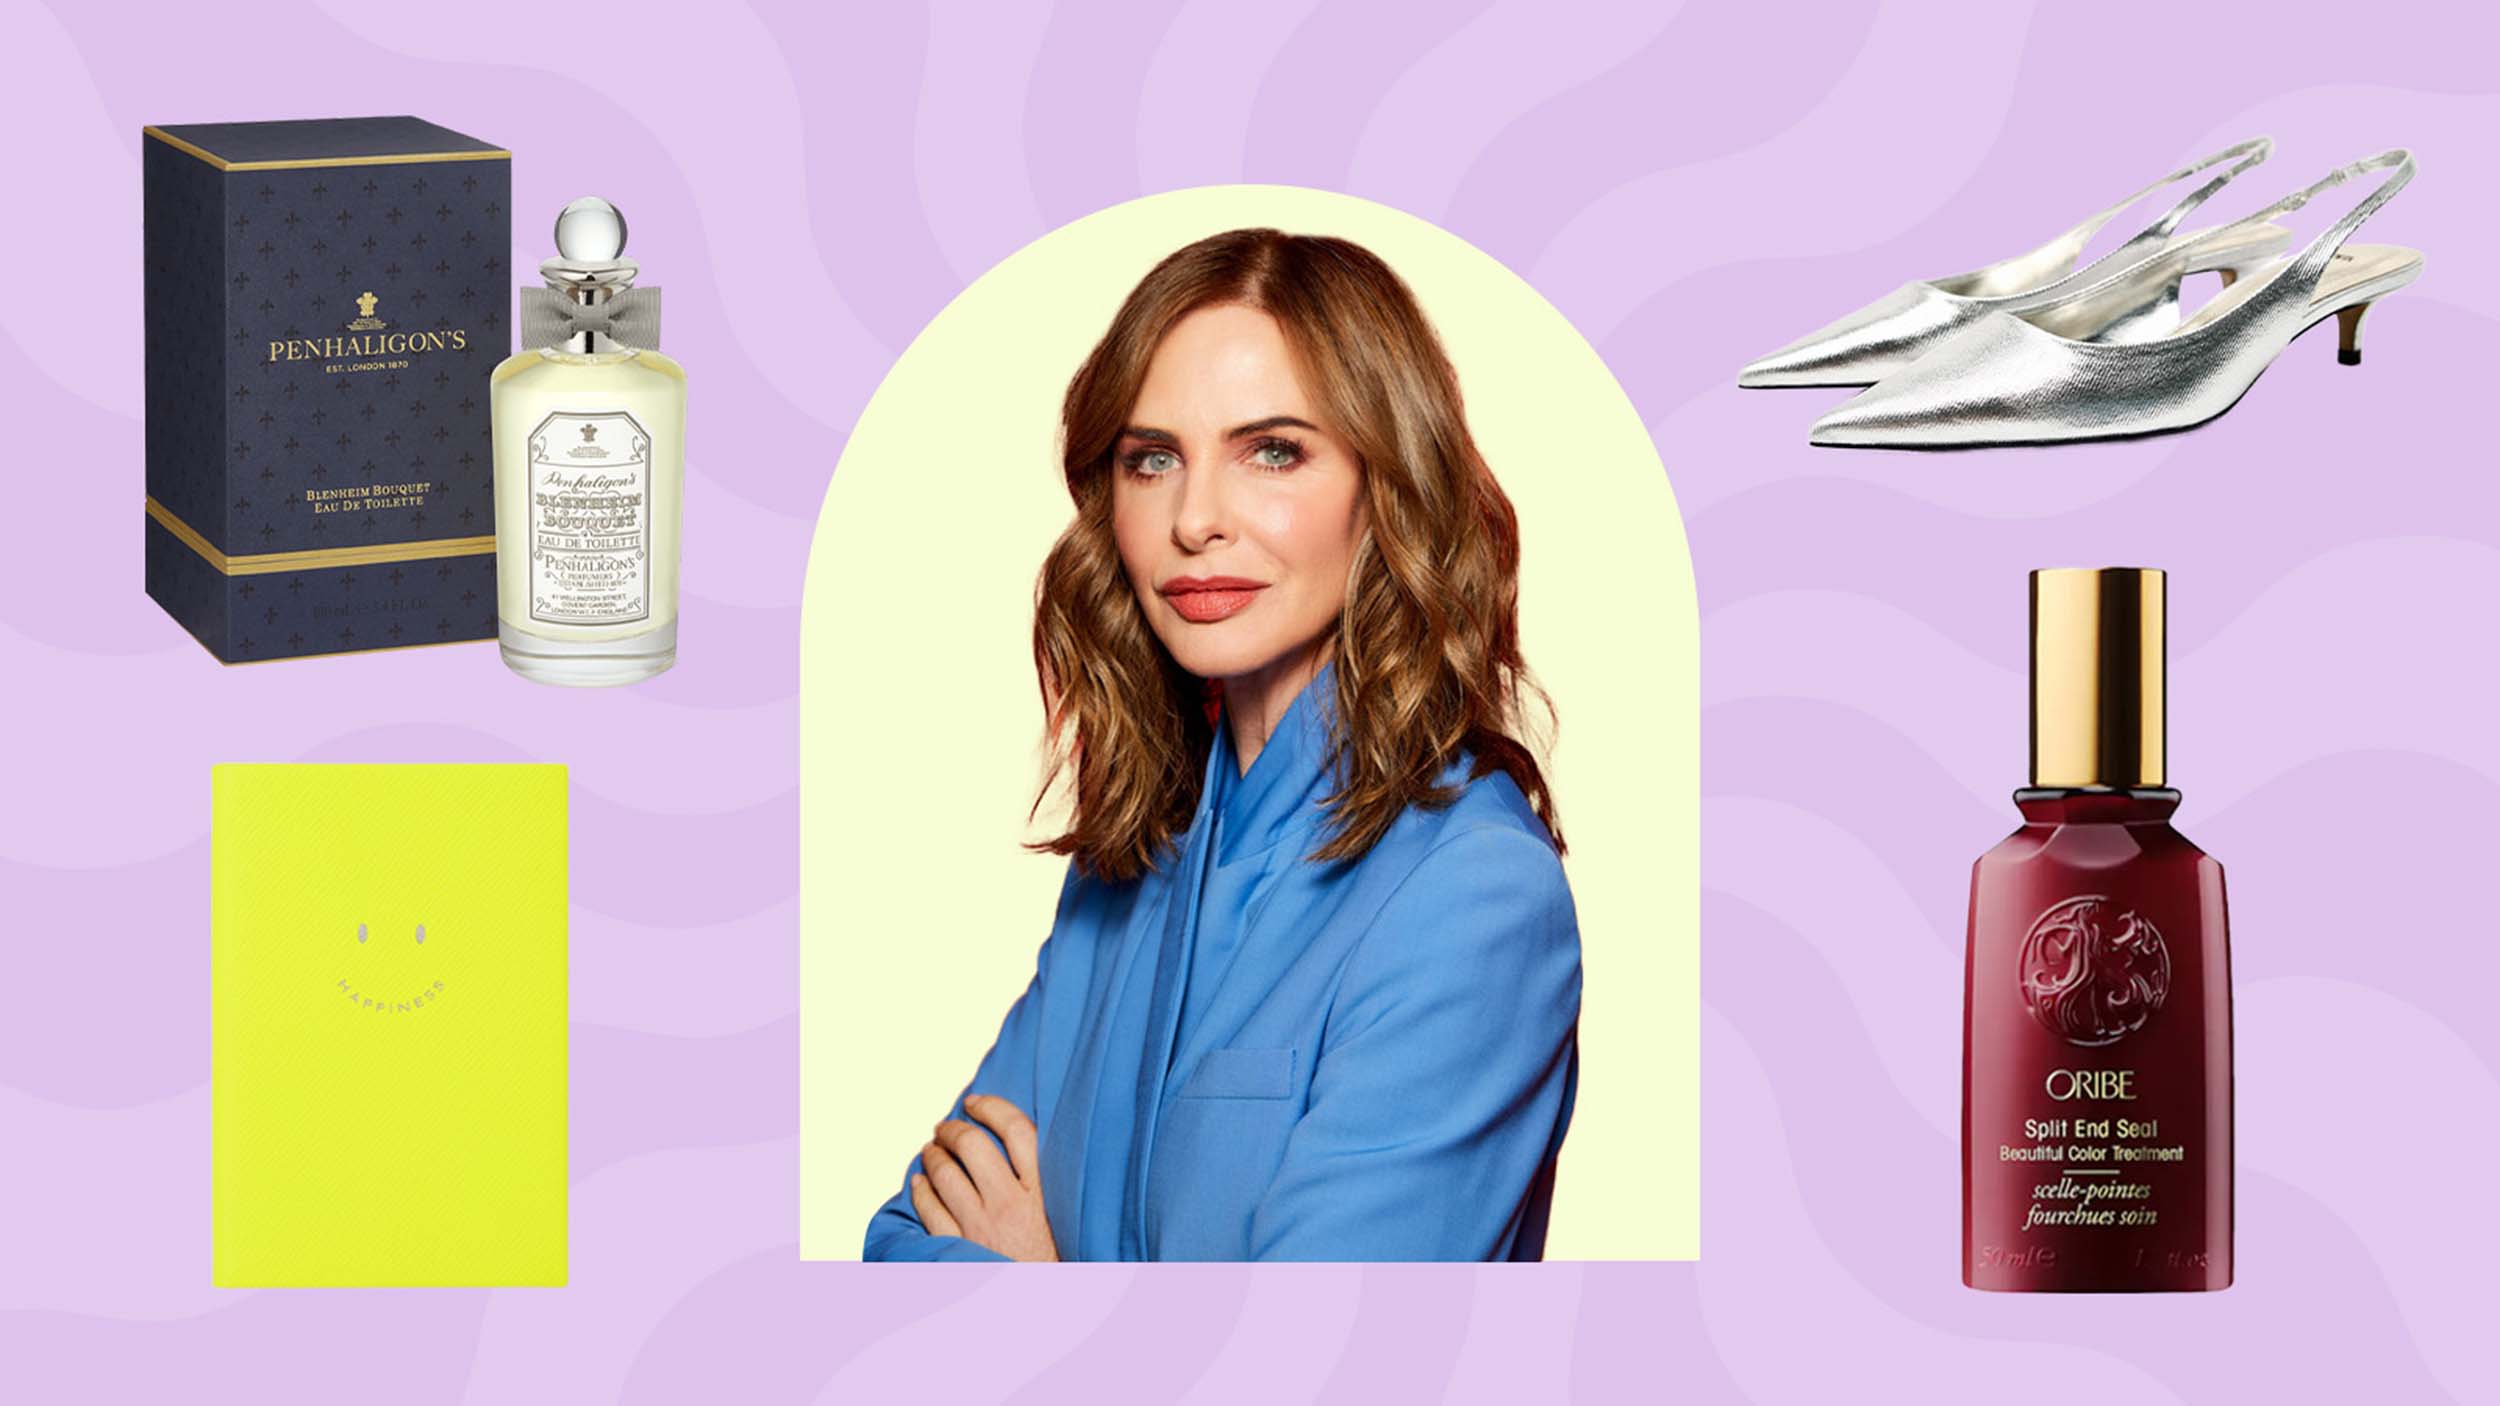 Beauty entrepreneur Trinny Woodall shares her 10 beauty and style  must-haves